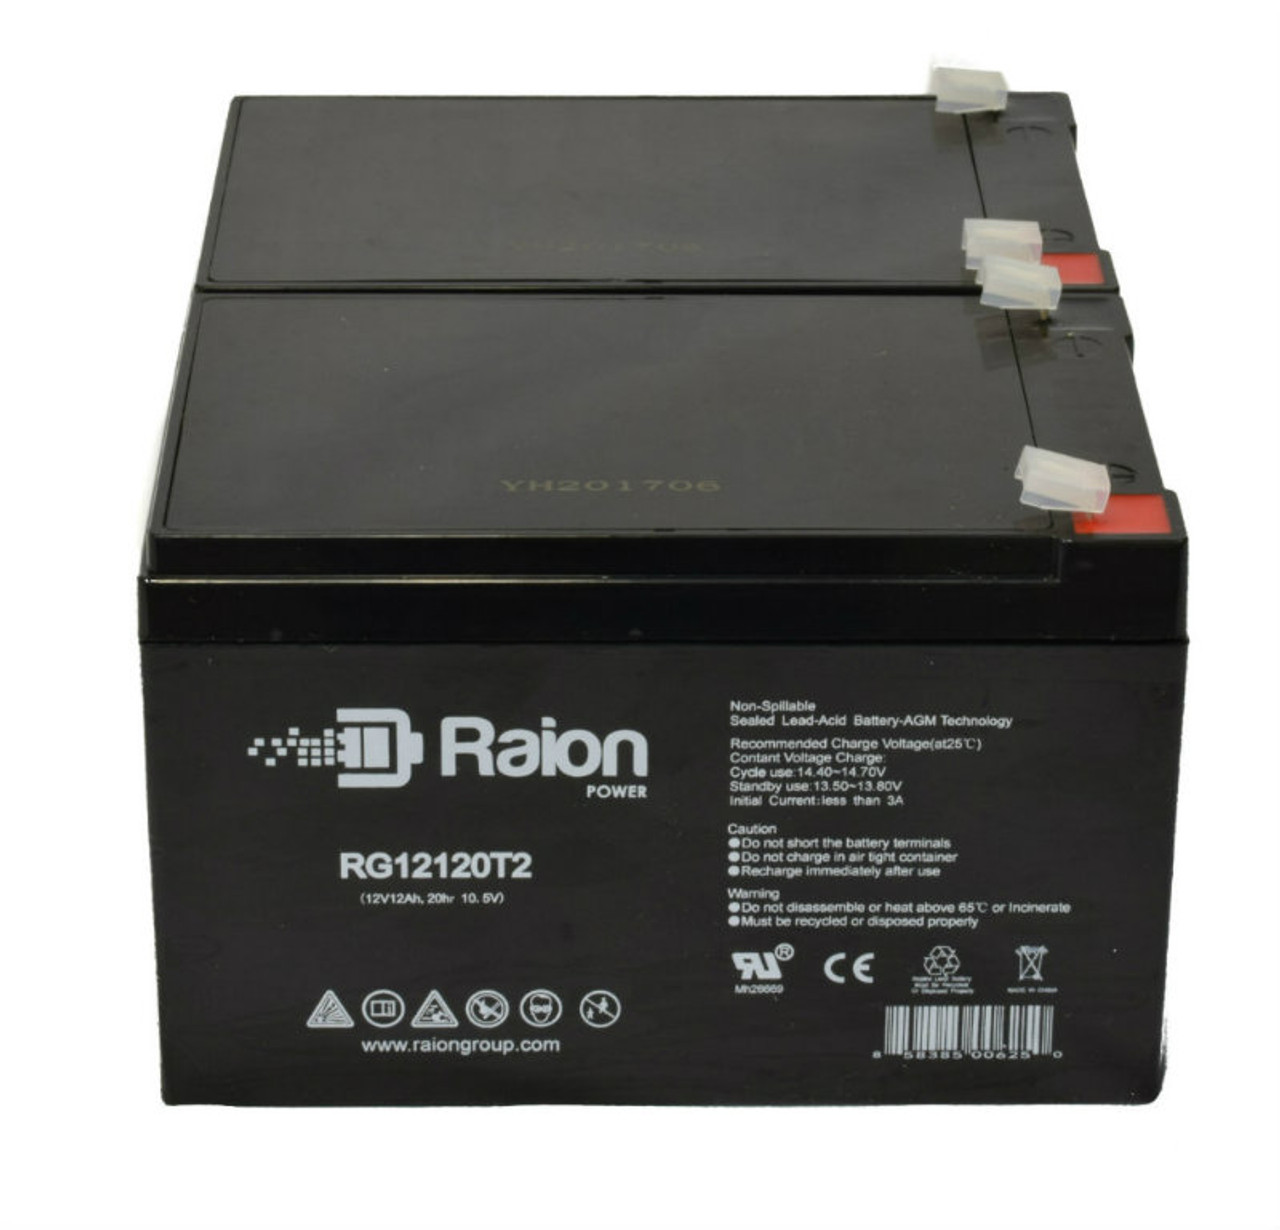 Raion Power RG12120T2 12V 12Ah Replacement UPS Battery for IBM 90P4829 - 2 Pack